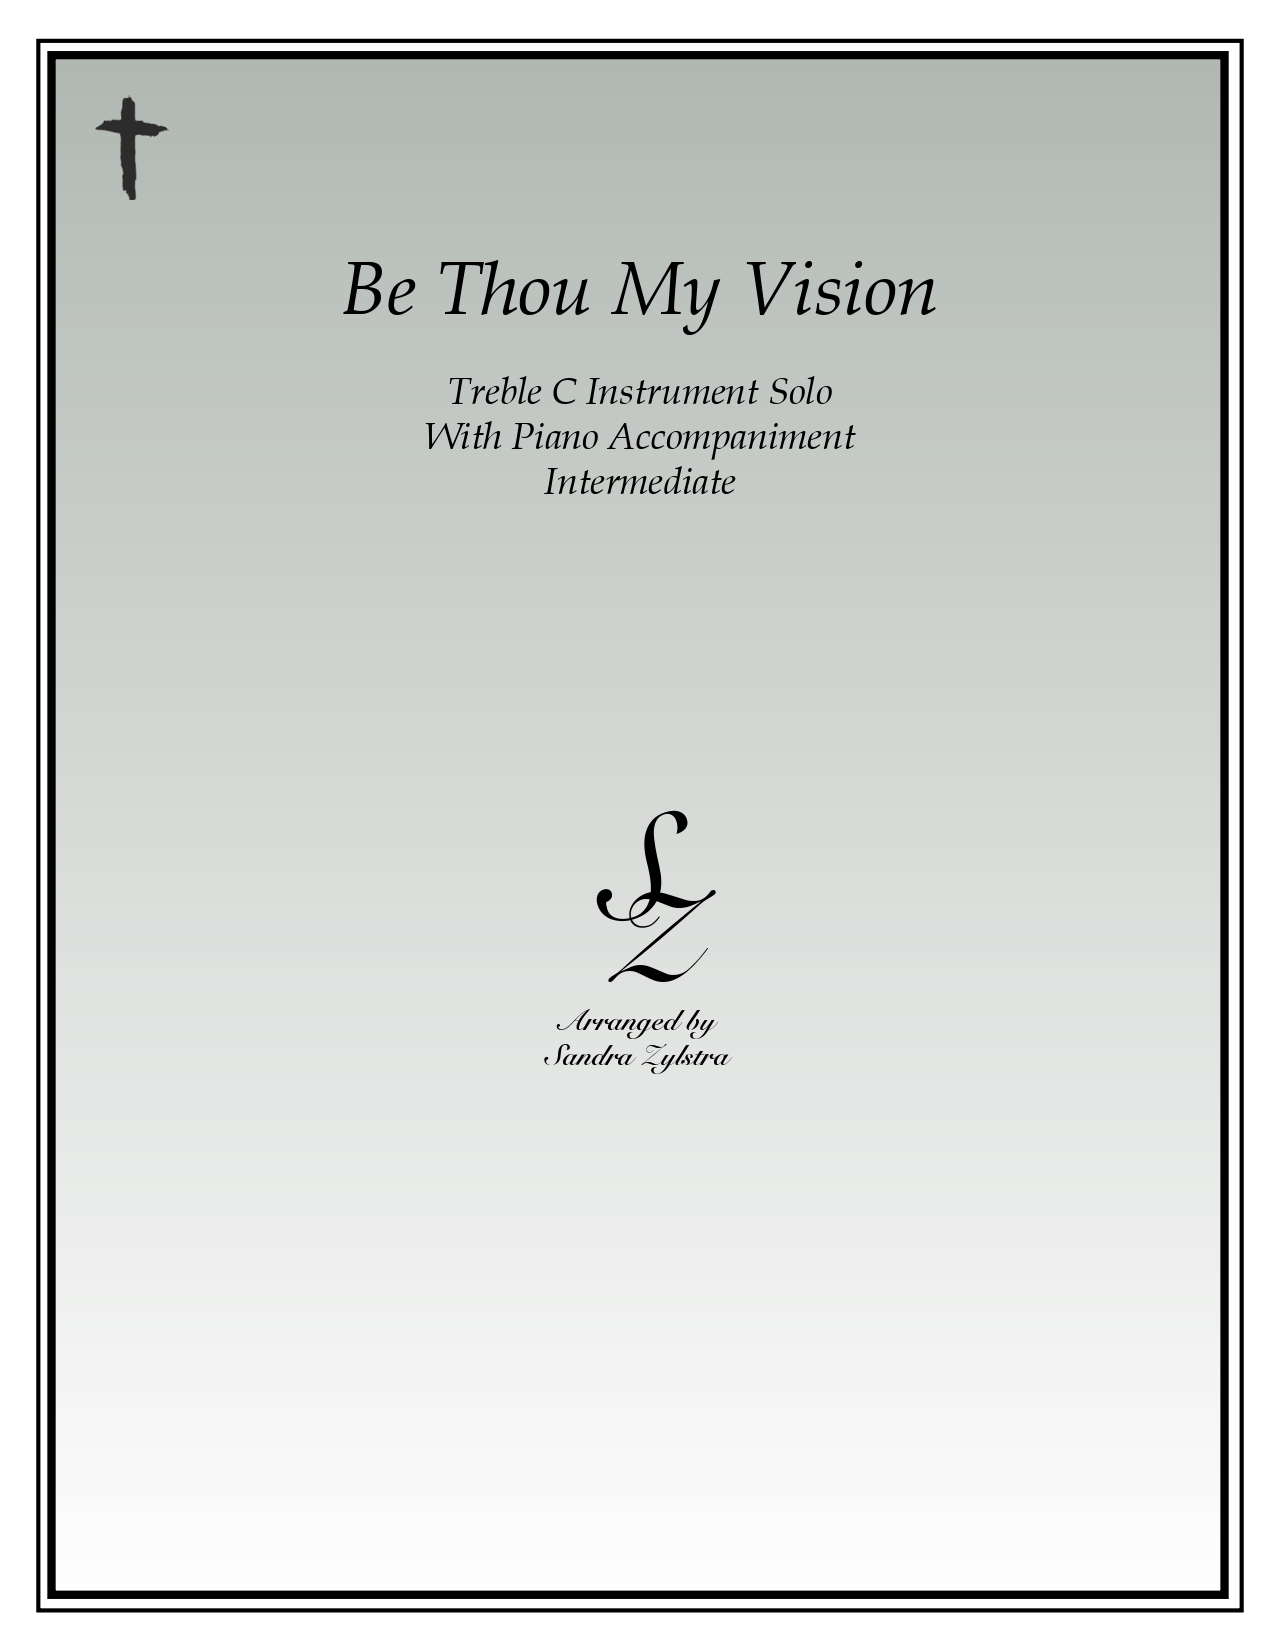 Be Thou My Vision treble C instrument solo part cover page 00011